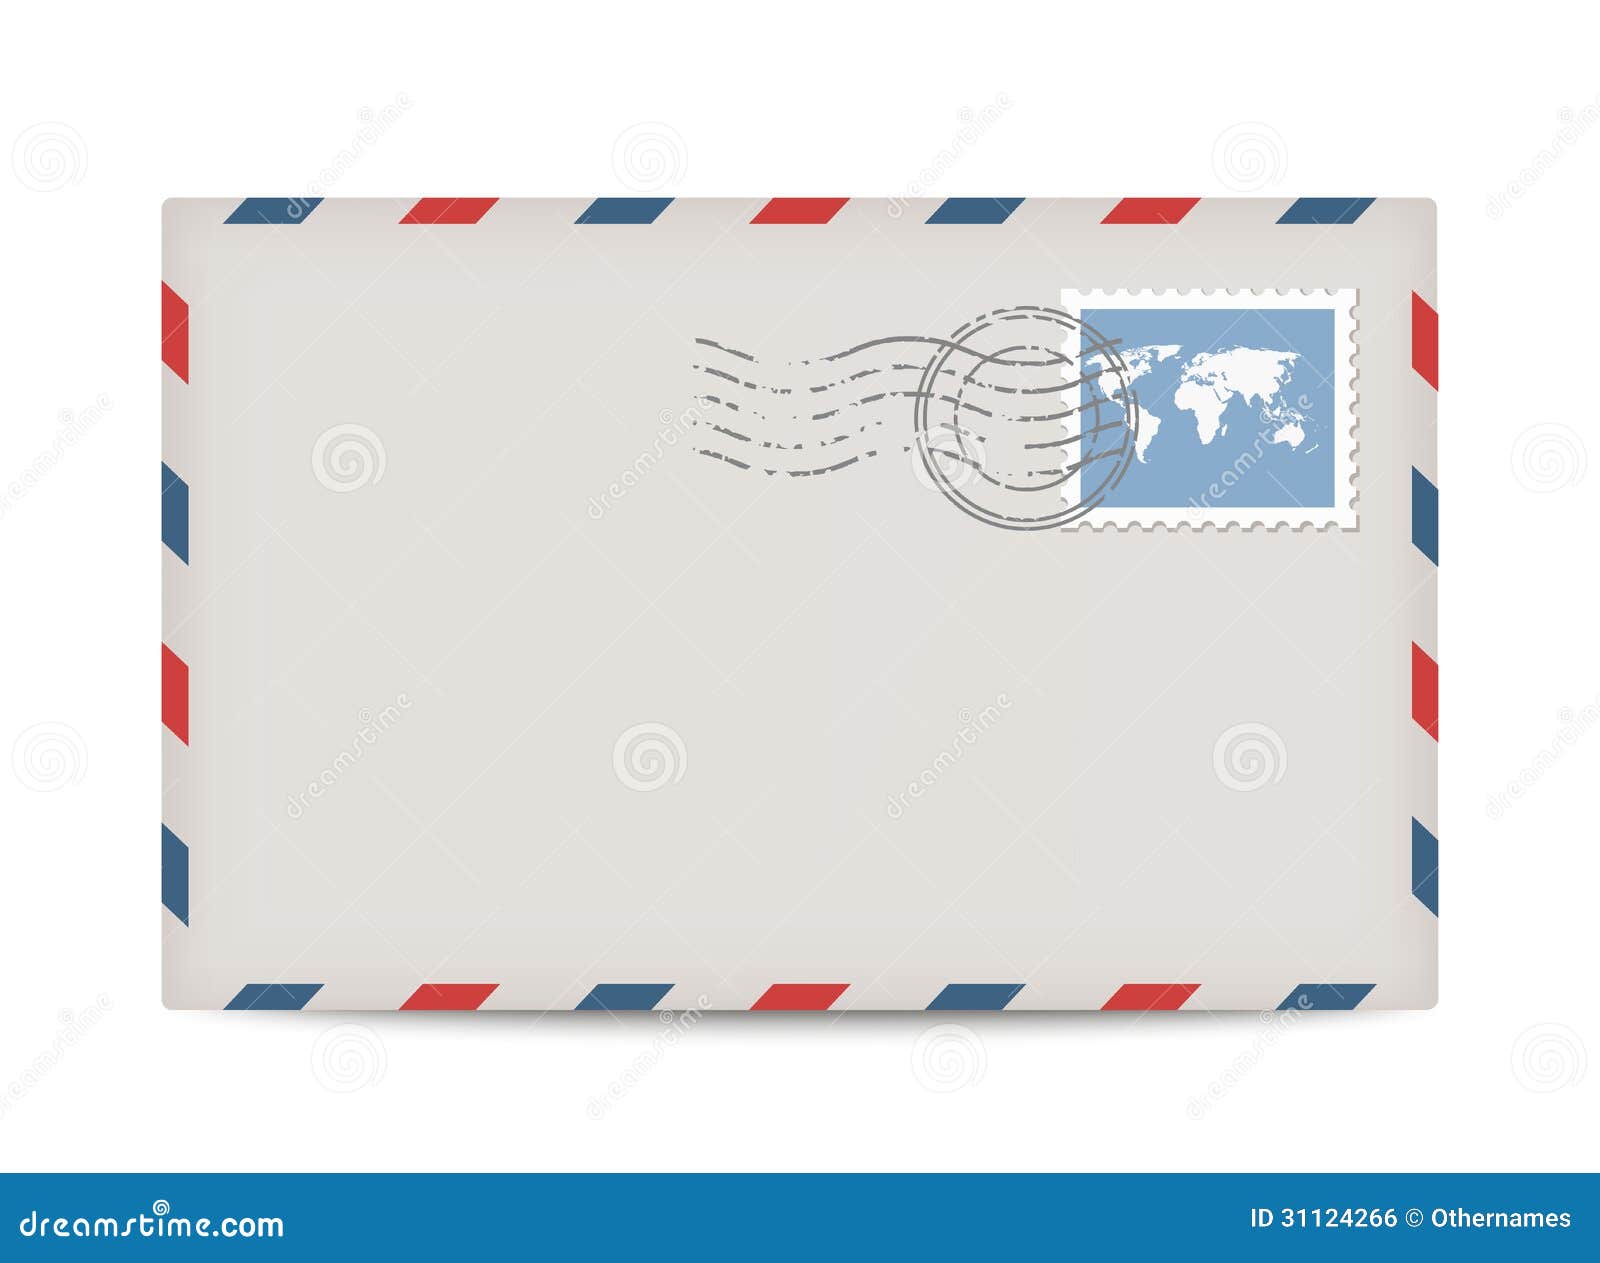  postage envelope with stamp